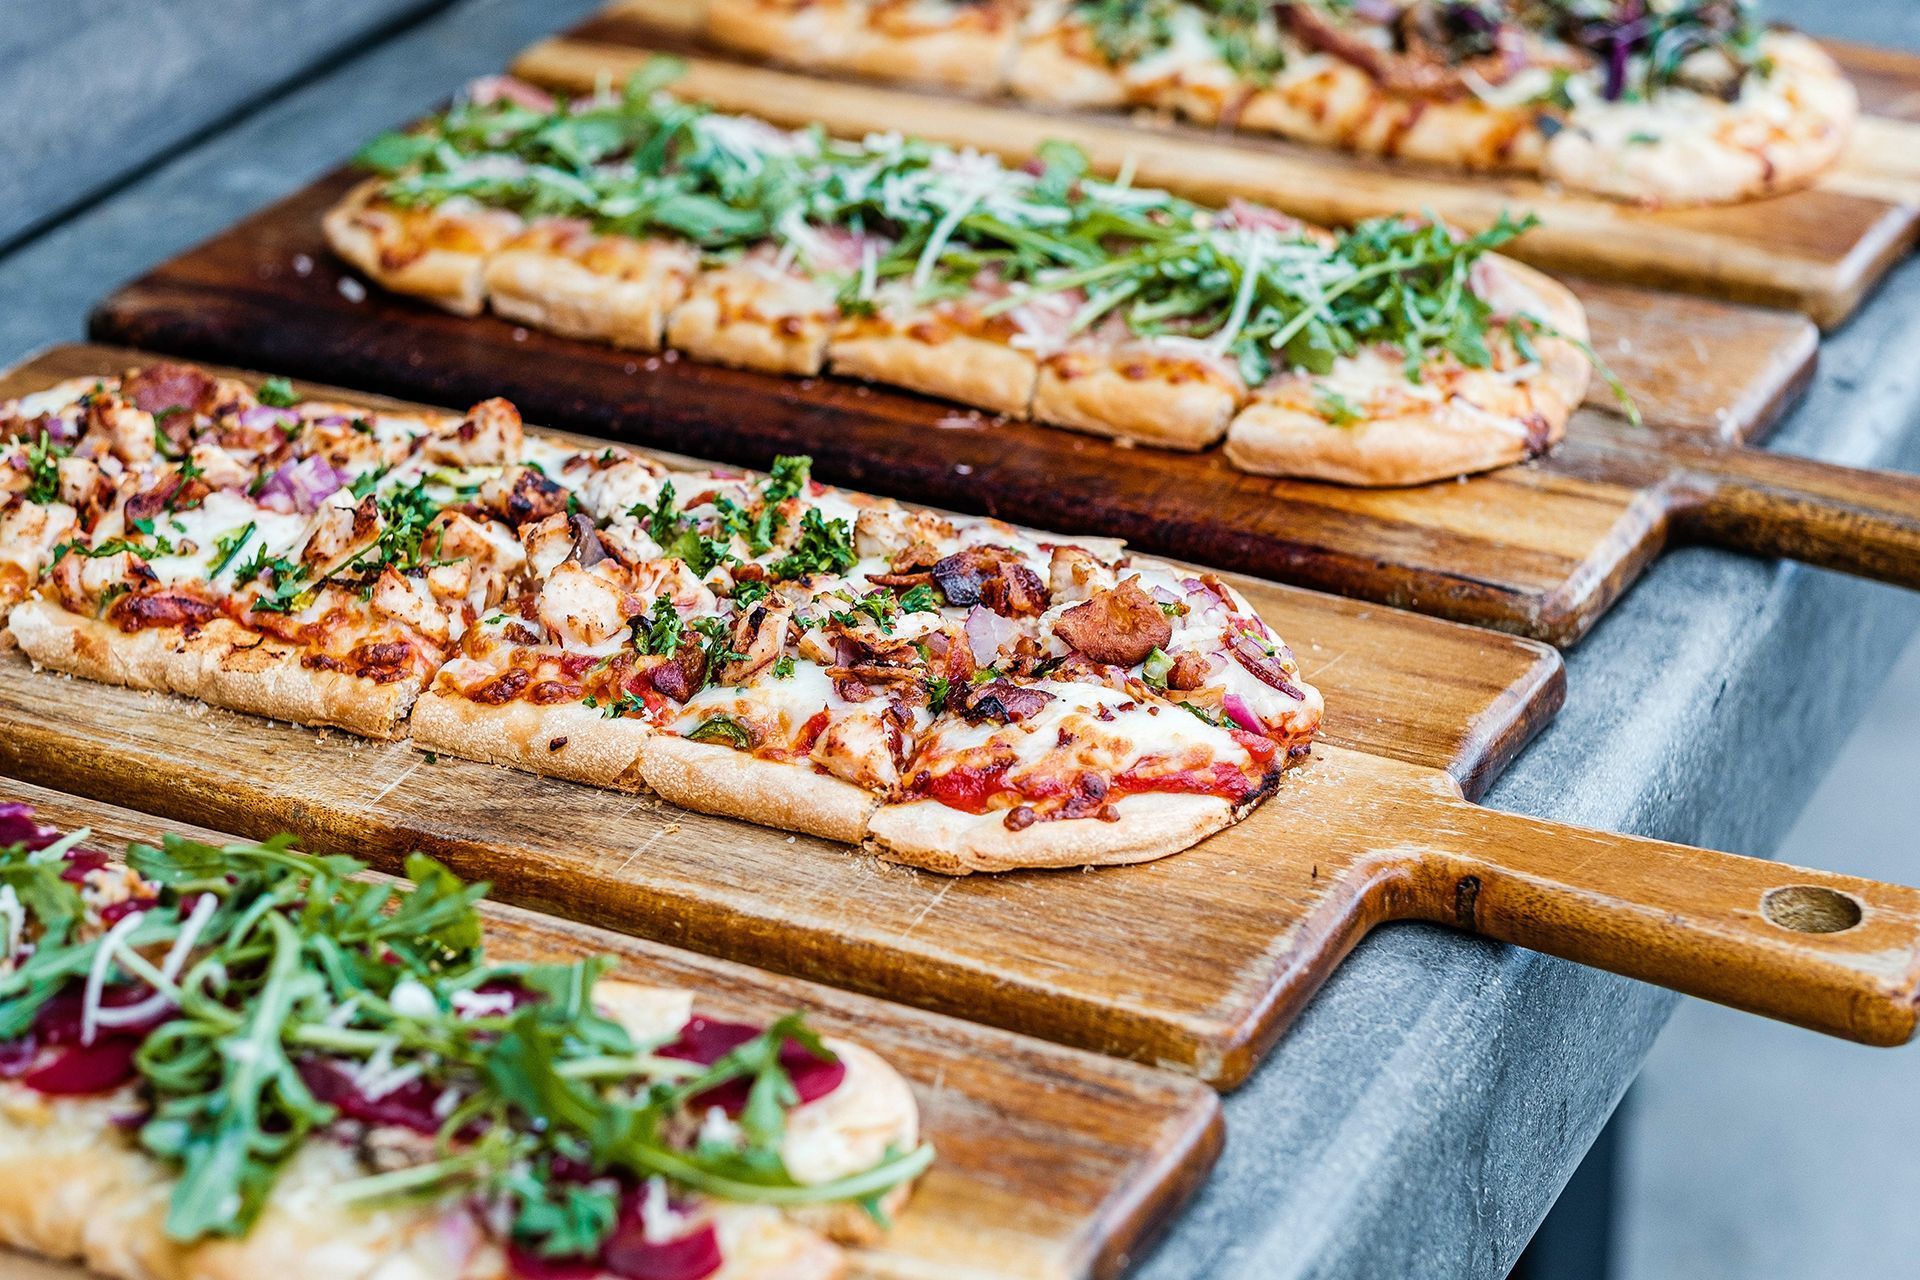 A row of pizzas on wooden cutting boards on a table.